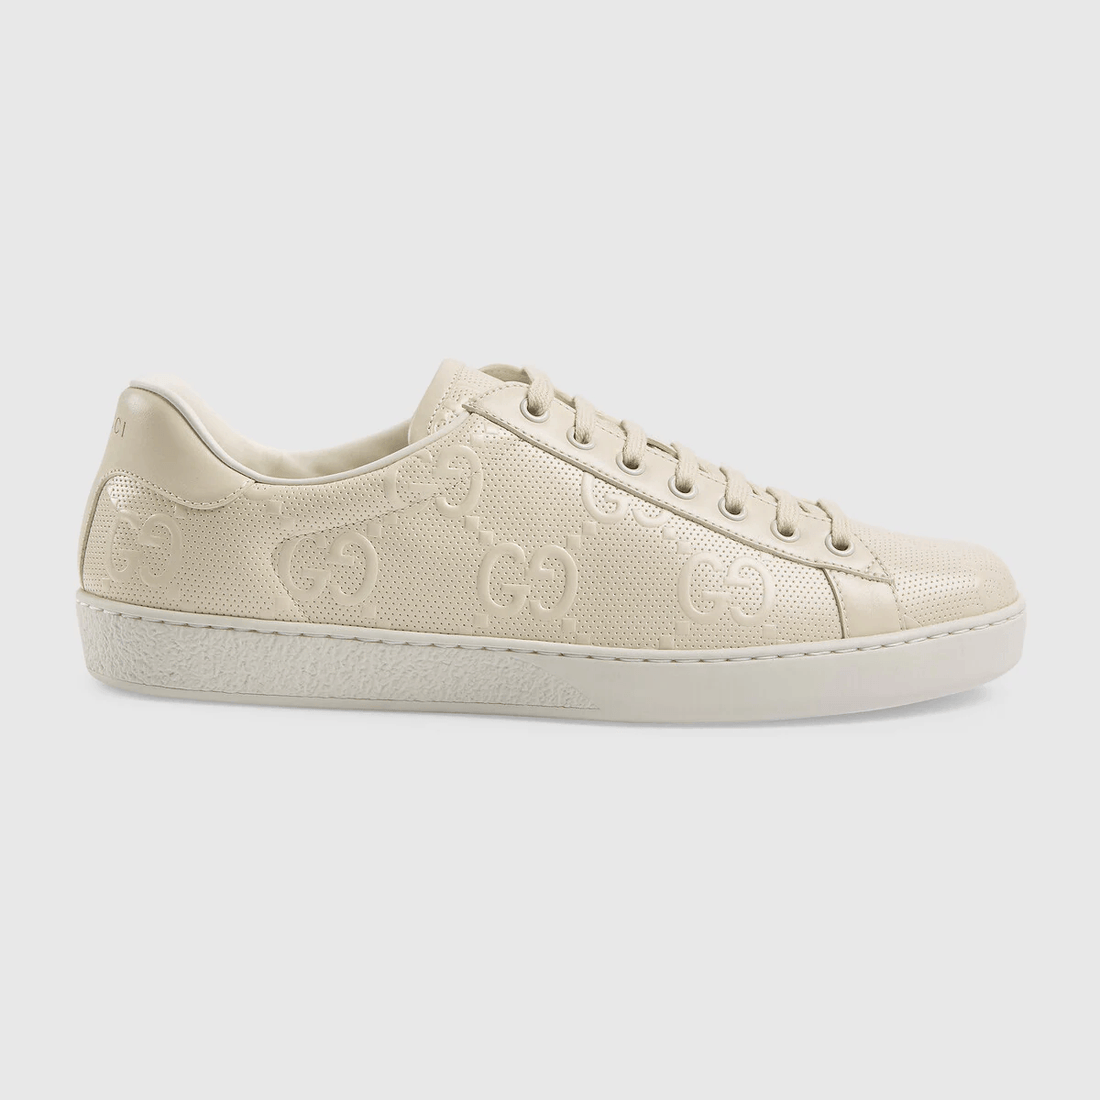 Gucci Ace GG White Leather - VIARESELL